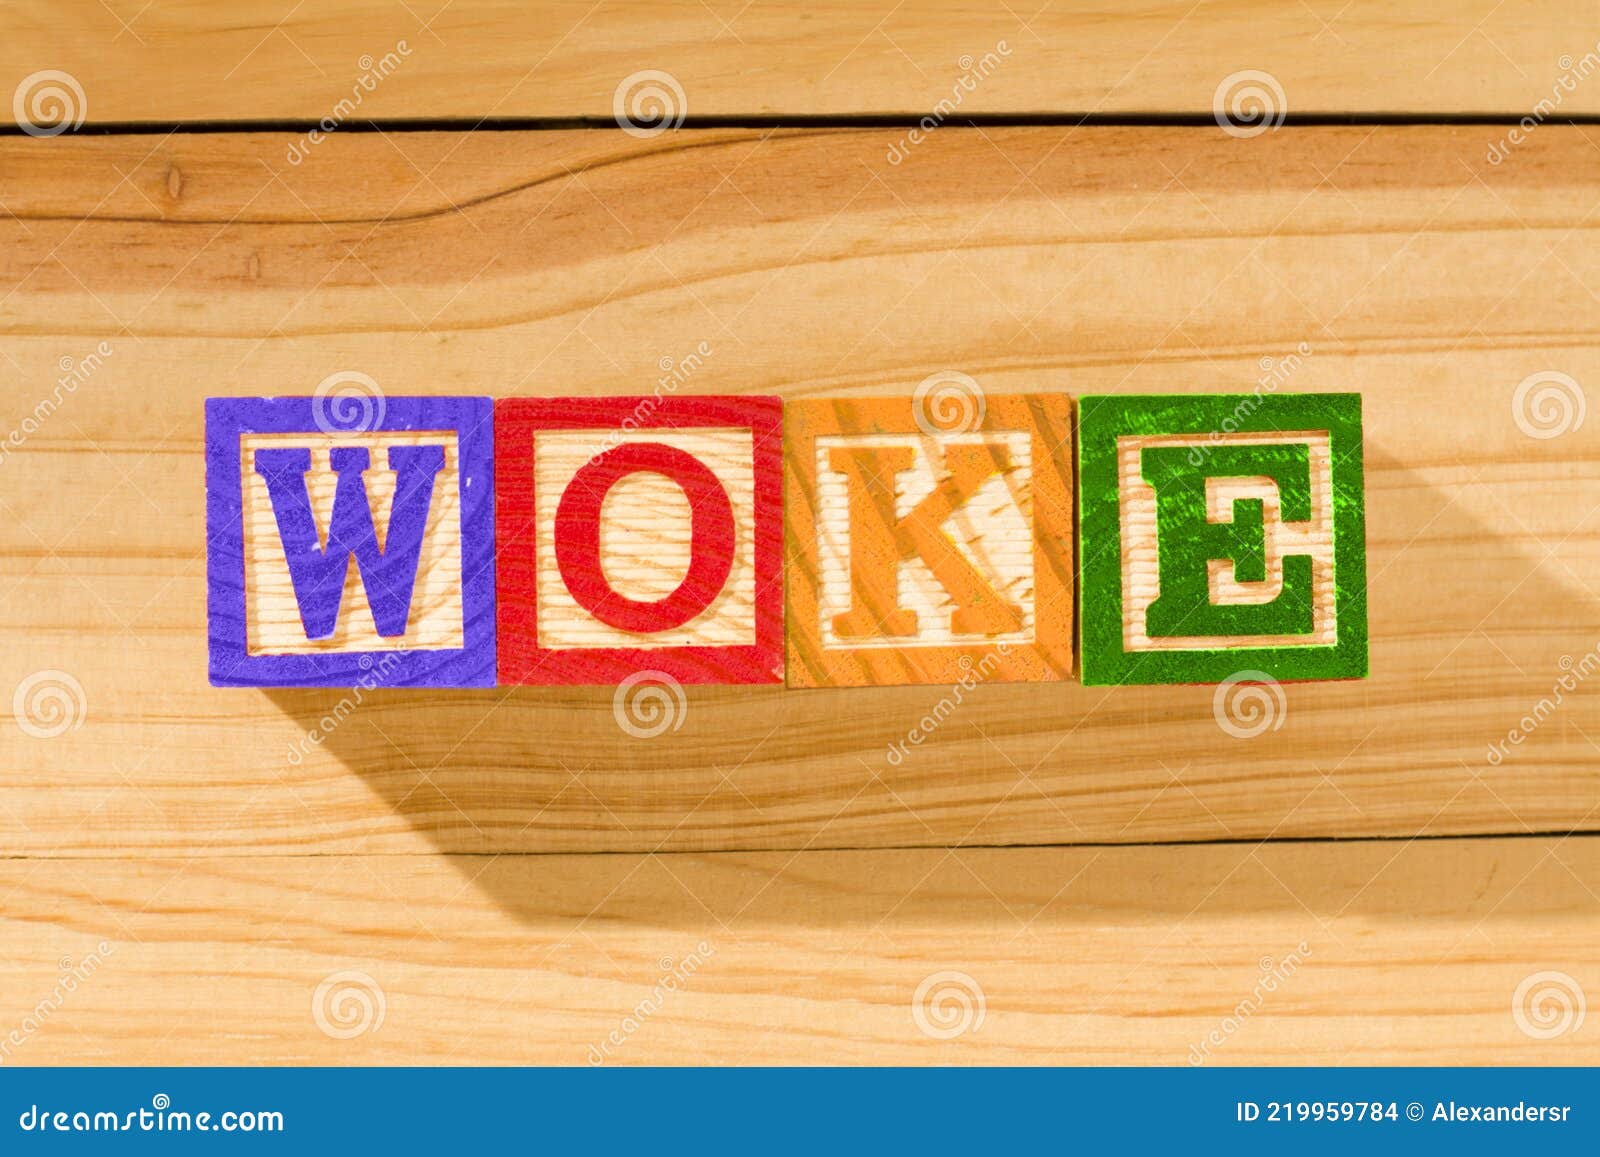 spectacular wooden cubes with the word woke on a wooden surface